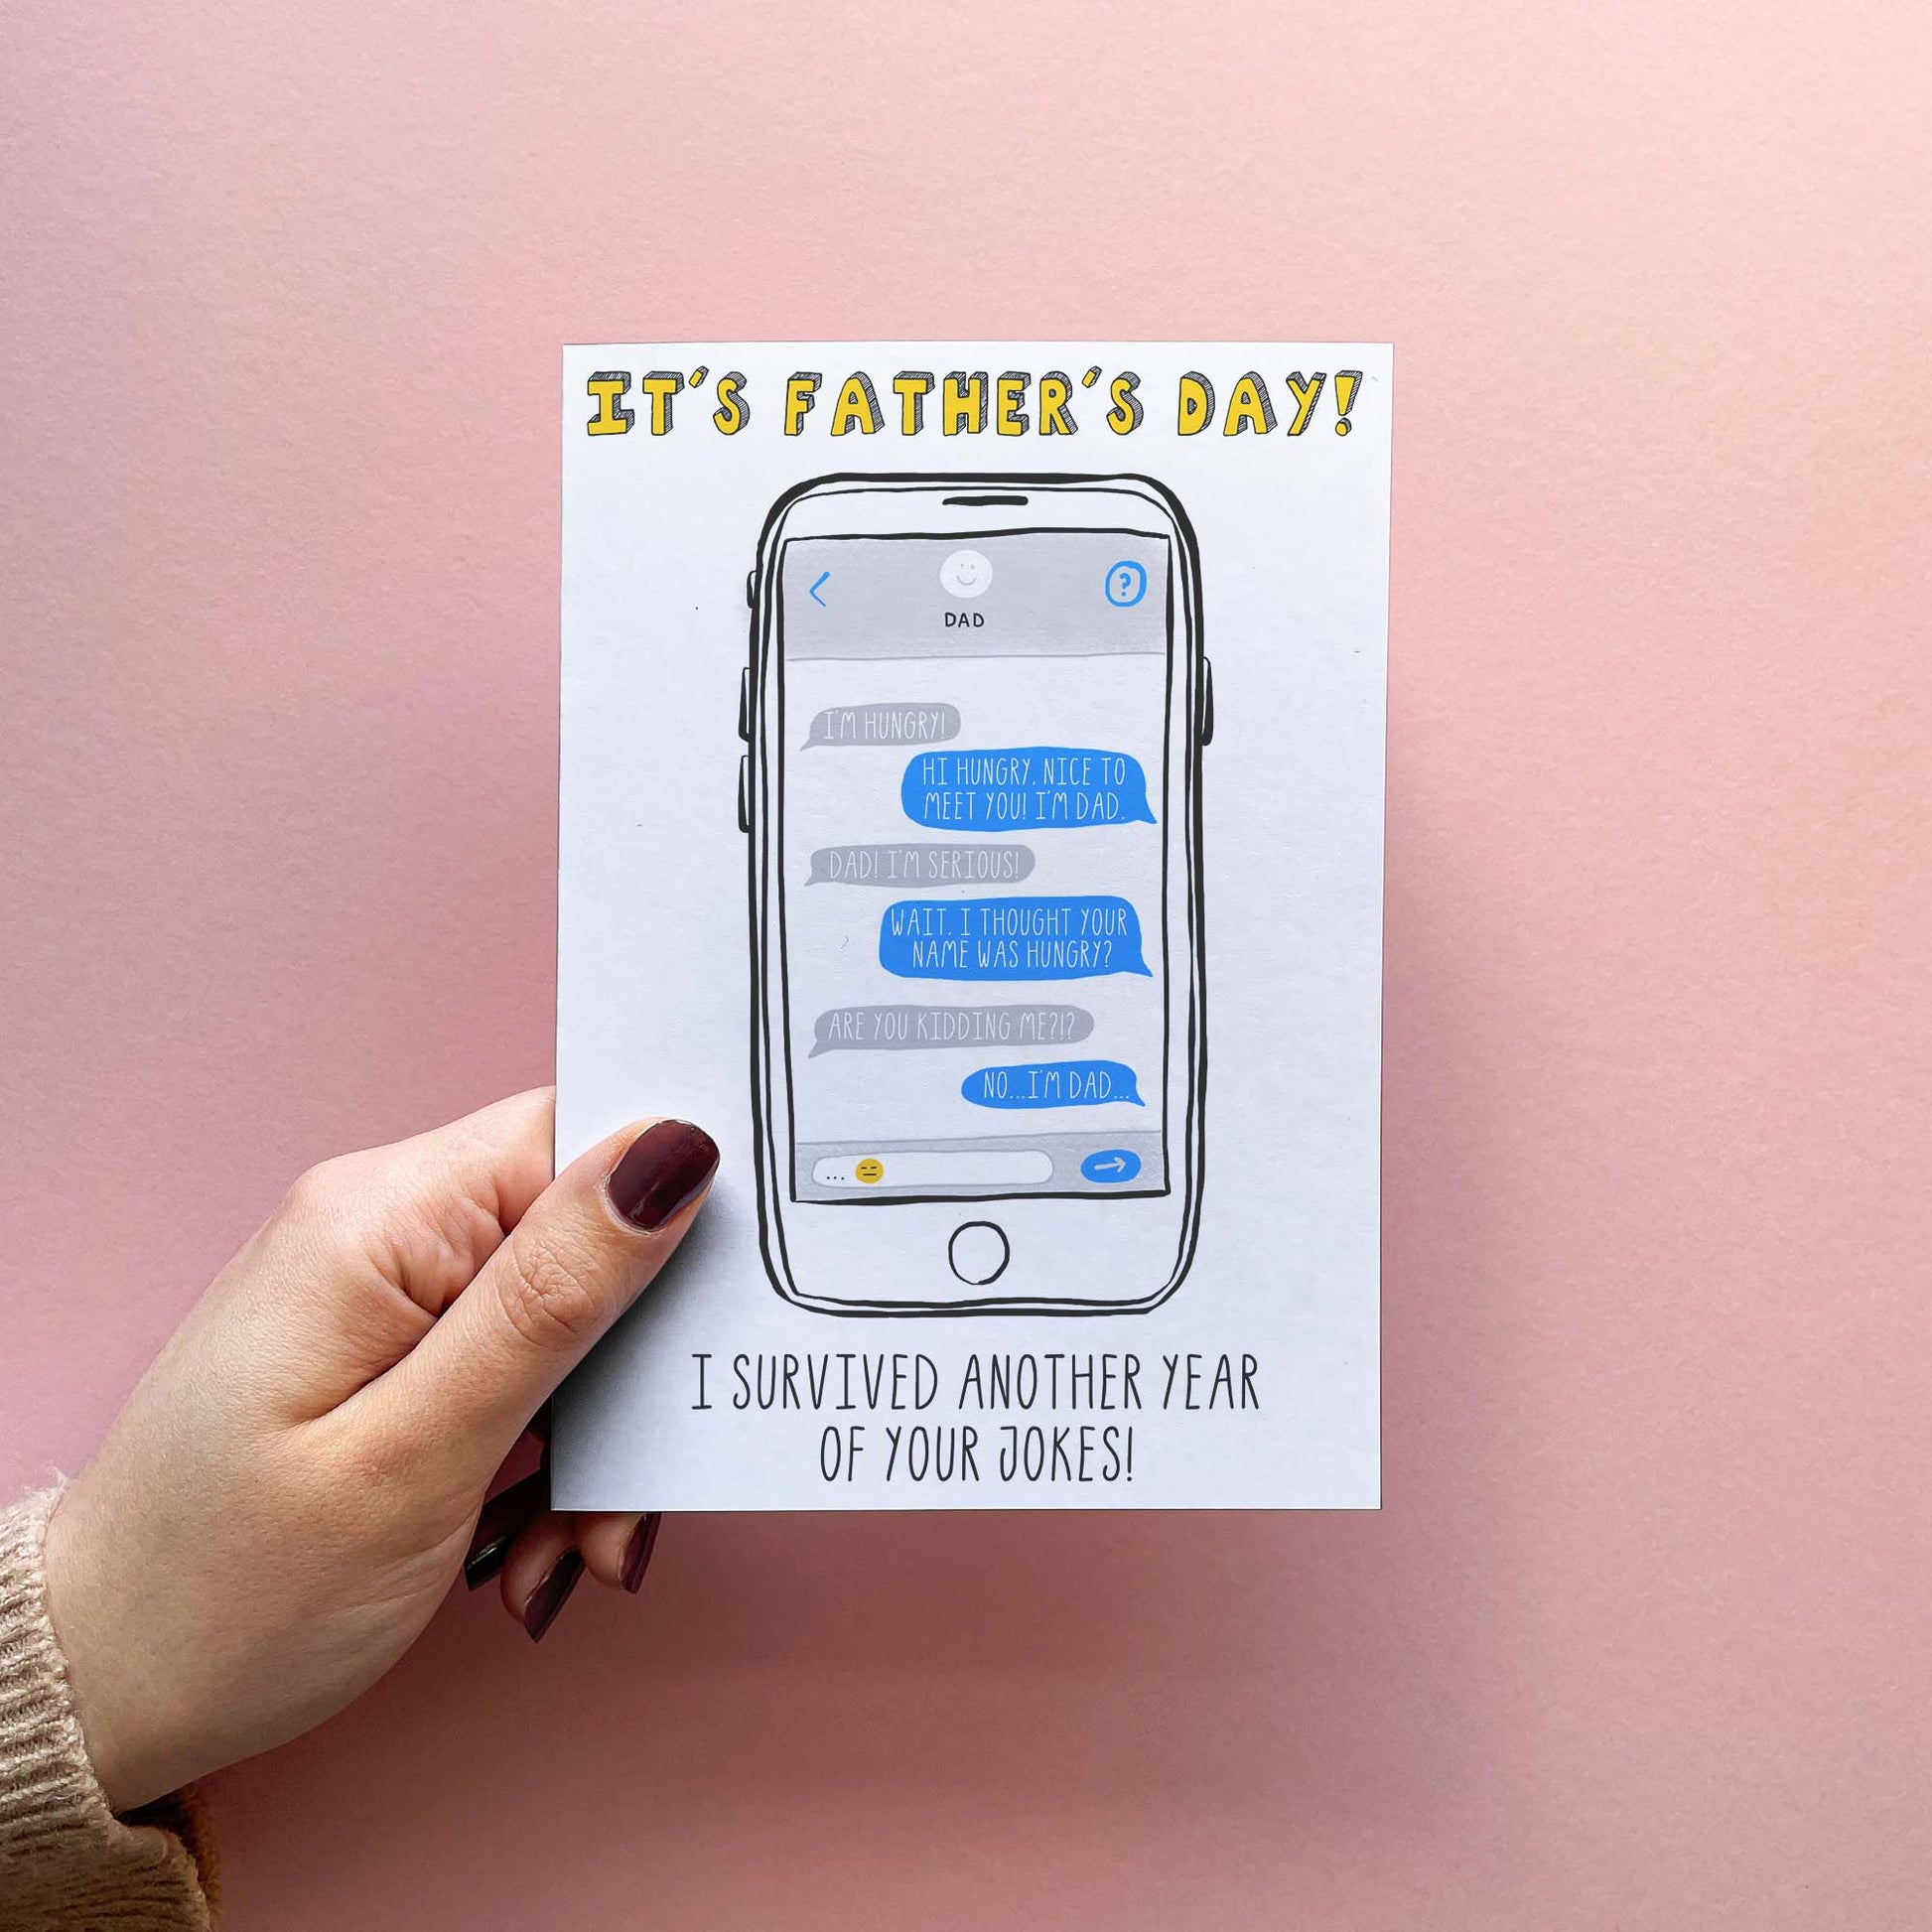 The perfect funny Father's Day card for the Dad who can't resit a Dad joke of the day, this card features hilarious father jokes that are sure to make him smile. Card that says 'It's Father's Day! I survived another year of your dad jokes!' Card is held in hand to show size.